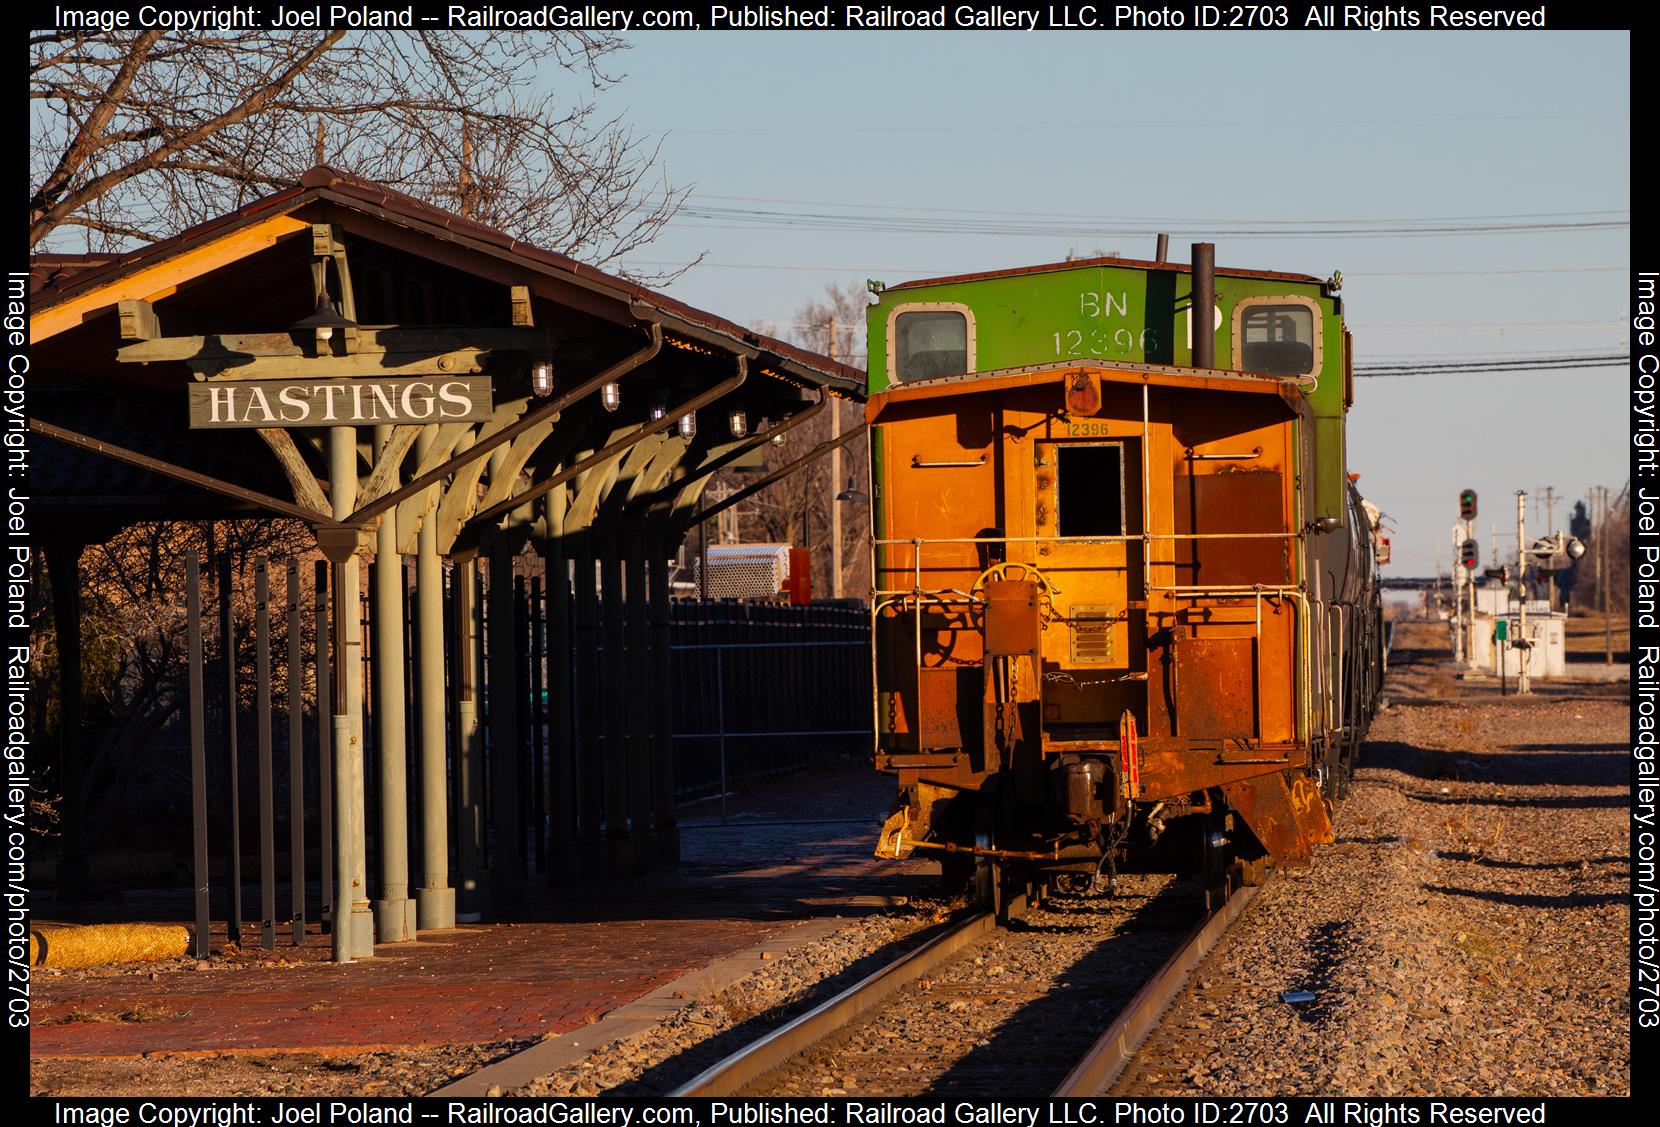 BN 12396 is a class Waycar and  is pictured in Hastings, Nebraska, USA.  This was taken along the Hastings Sub on the BNSF Railway. Photo Copyright: Joel Poland uploaded to Railroad Gallery on 12/17/2023. This photograph of BN 12396 was taken on Saturday, December 17, 2022. All Rights Reserved. 